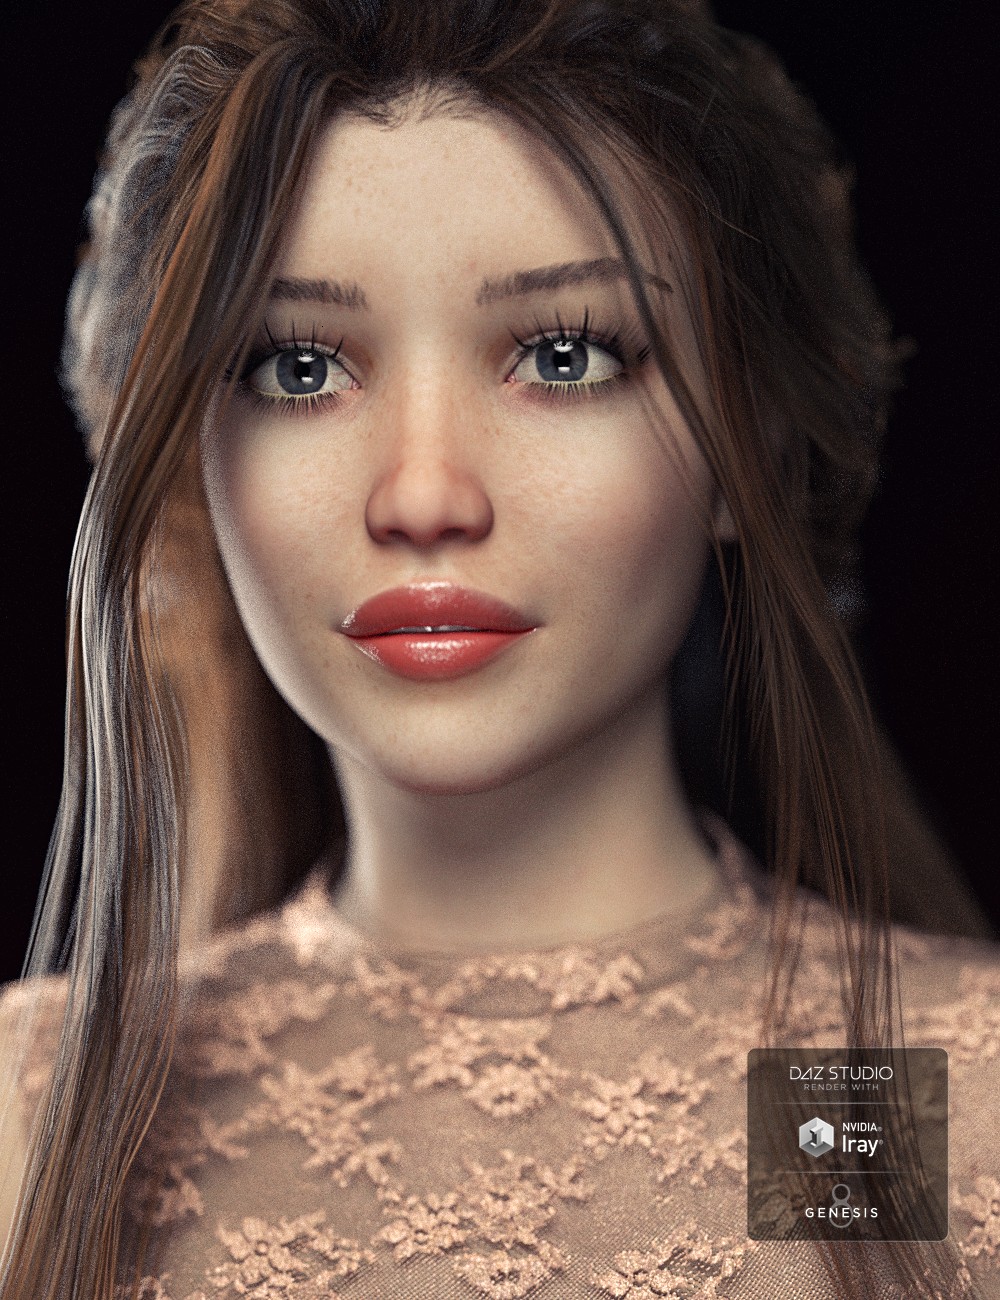 SC Jade for Genesis 8 Female by: Second-Circle, 3D Models by Daz 3D